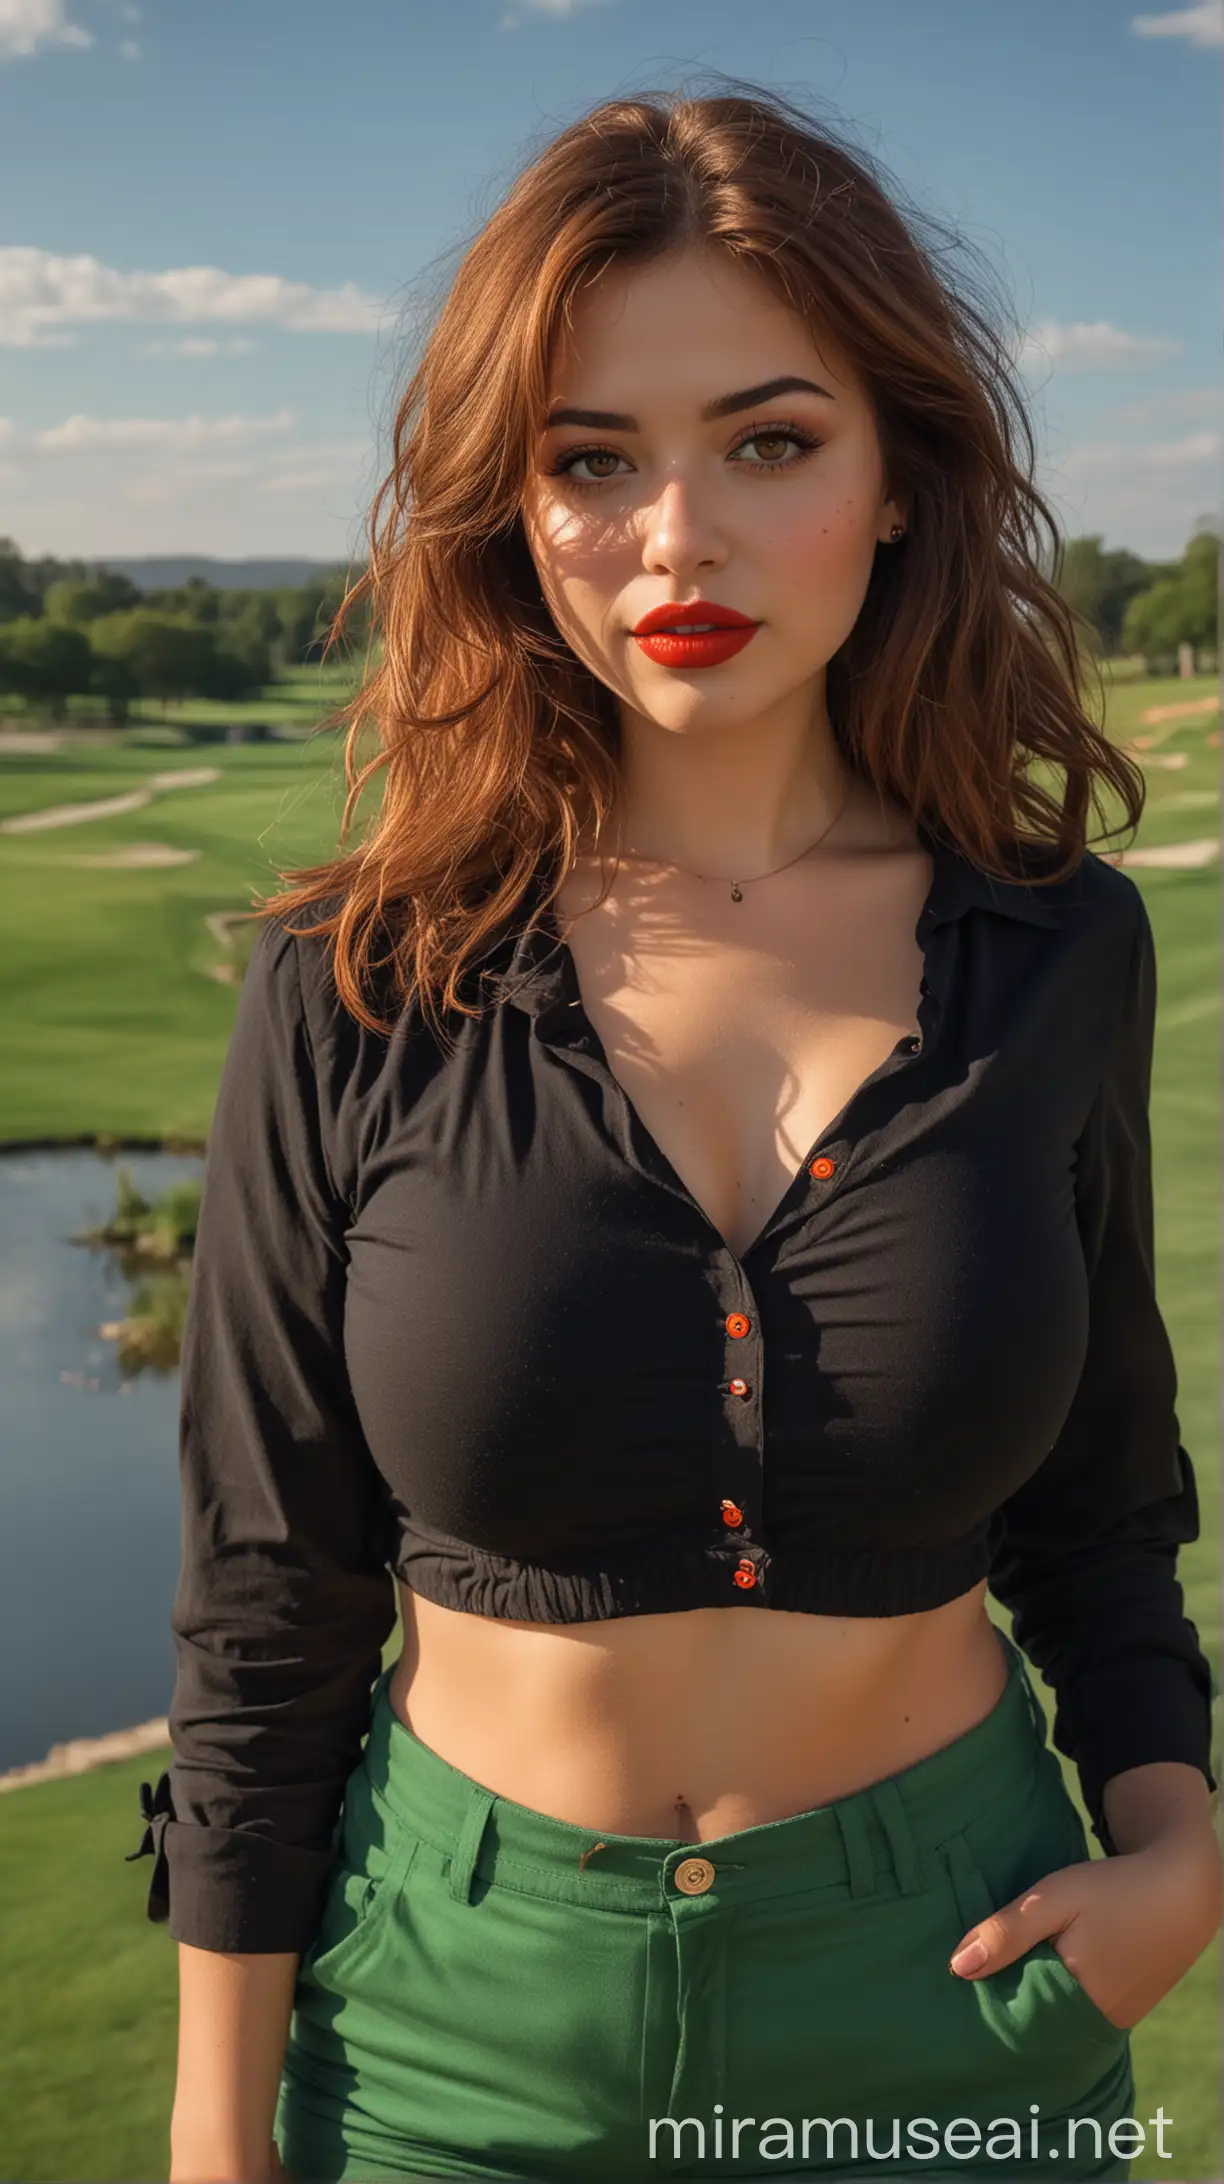 4k Ai art beautiful USA curvy girl brown hair red lipstick nose ring ear tops iskaf green trousers and blue doted black shirt and orange bra in usa hollywood lakes golf club